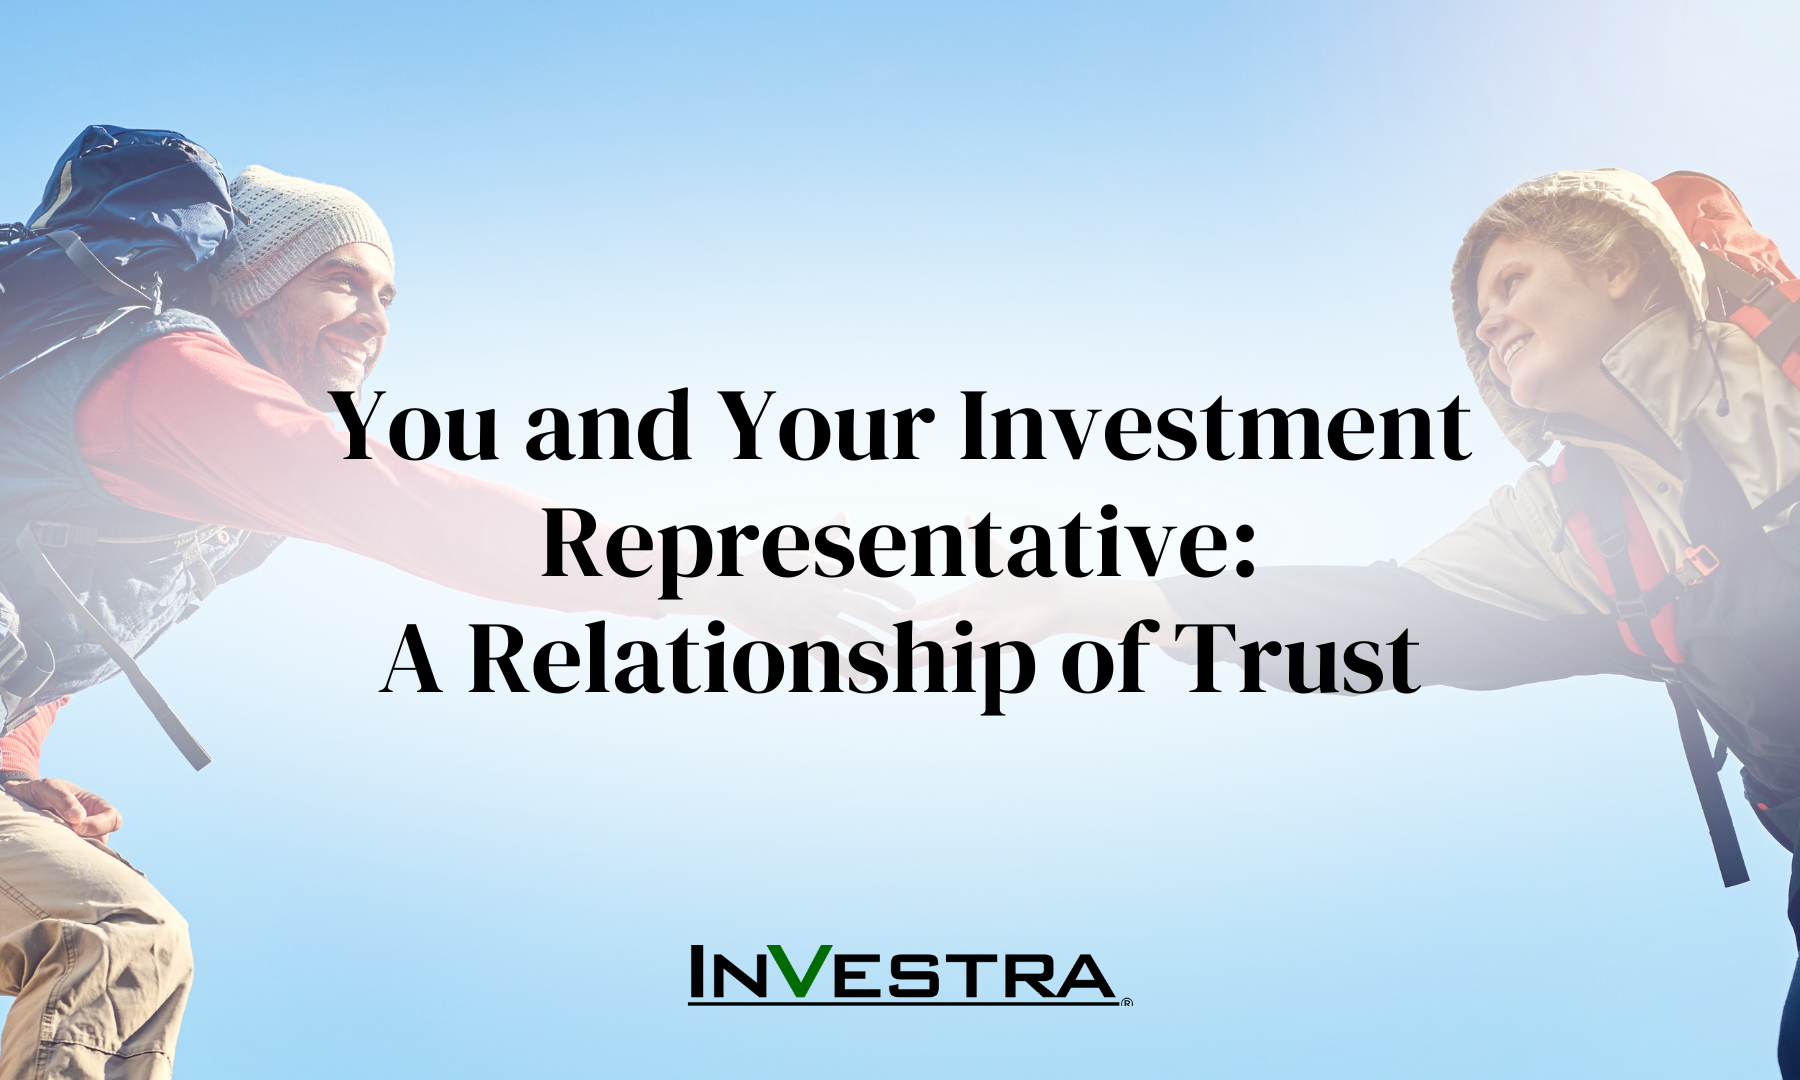 You and Your Investment Representative: A Relationship of Trust